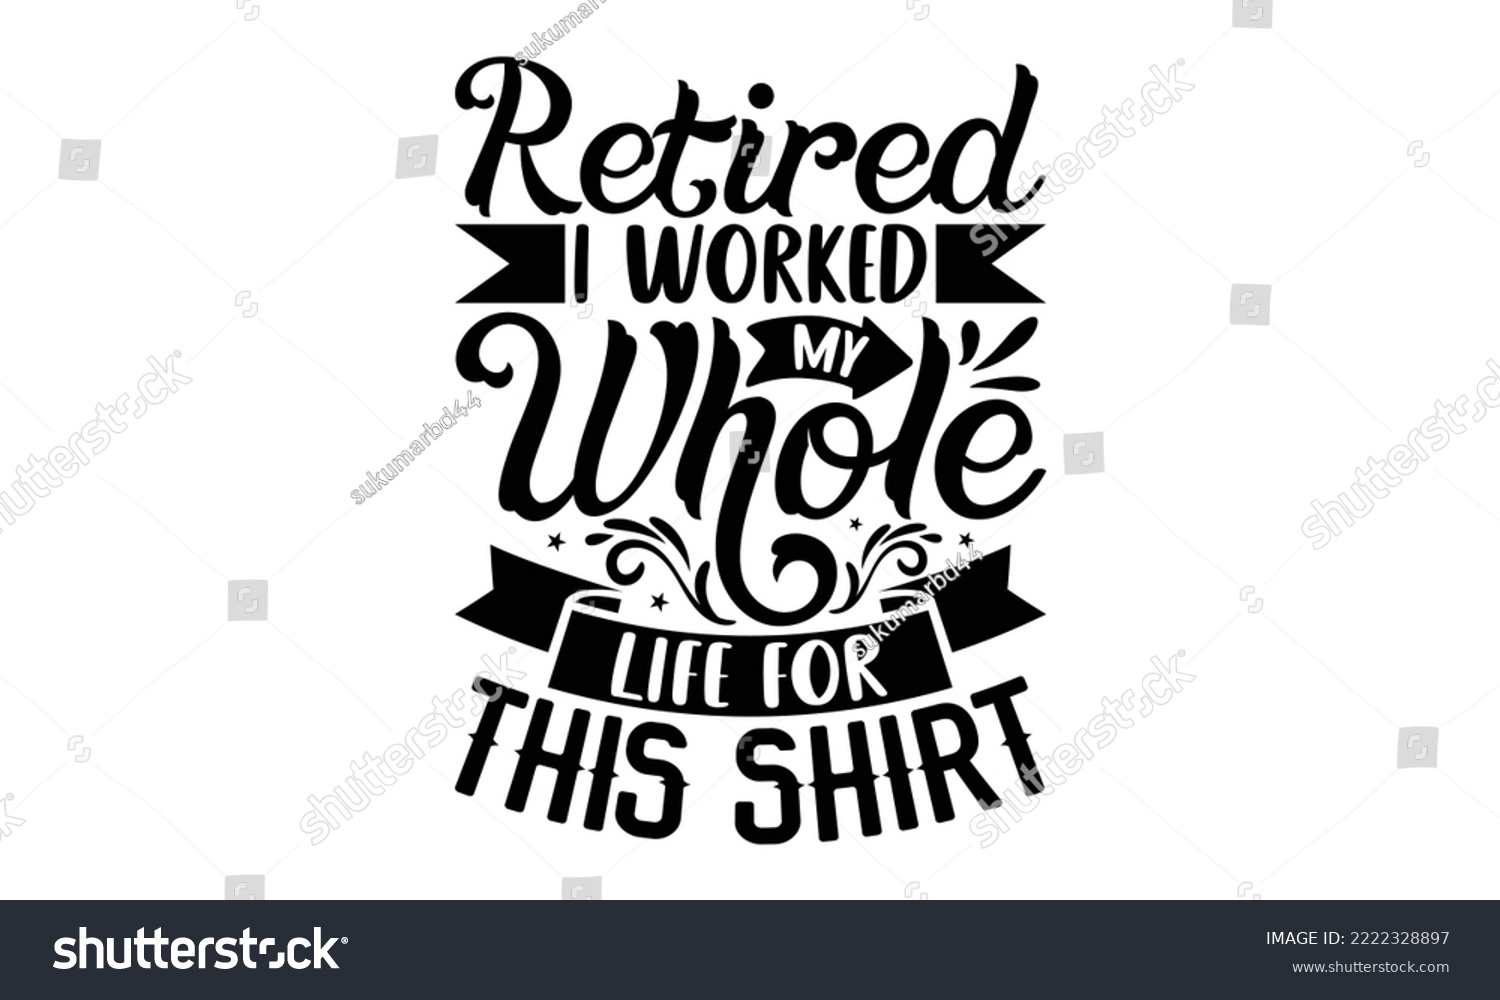 SVG of Retired I Worked My Whole Life For This Shirt - Retirement SVG Design, Hand drawn lettering phrase isolated on white background, typography t shirt design, eps, Files for Cutting svg